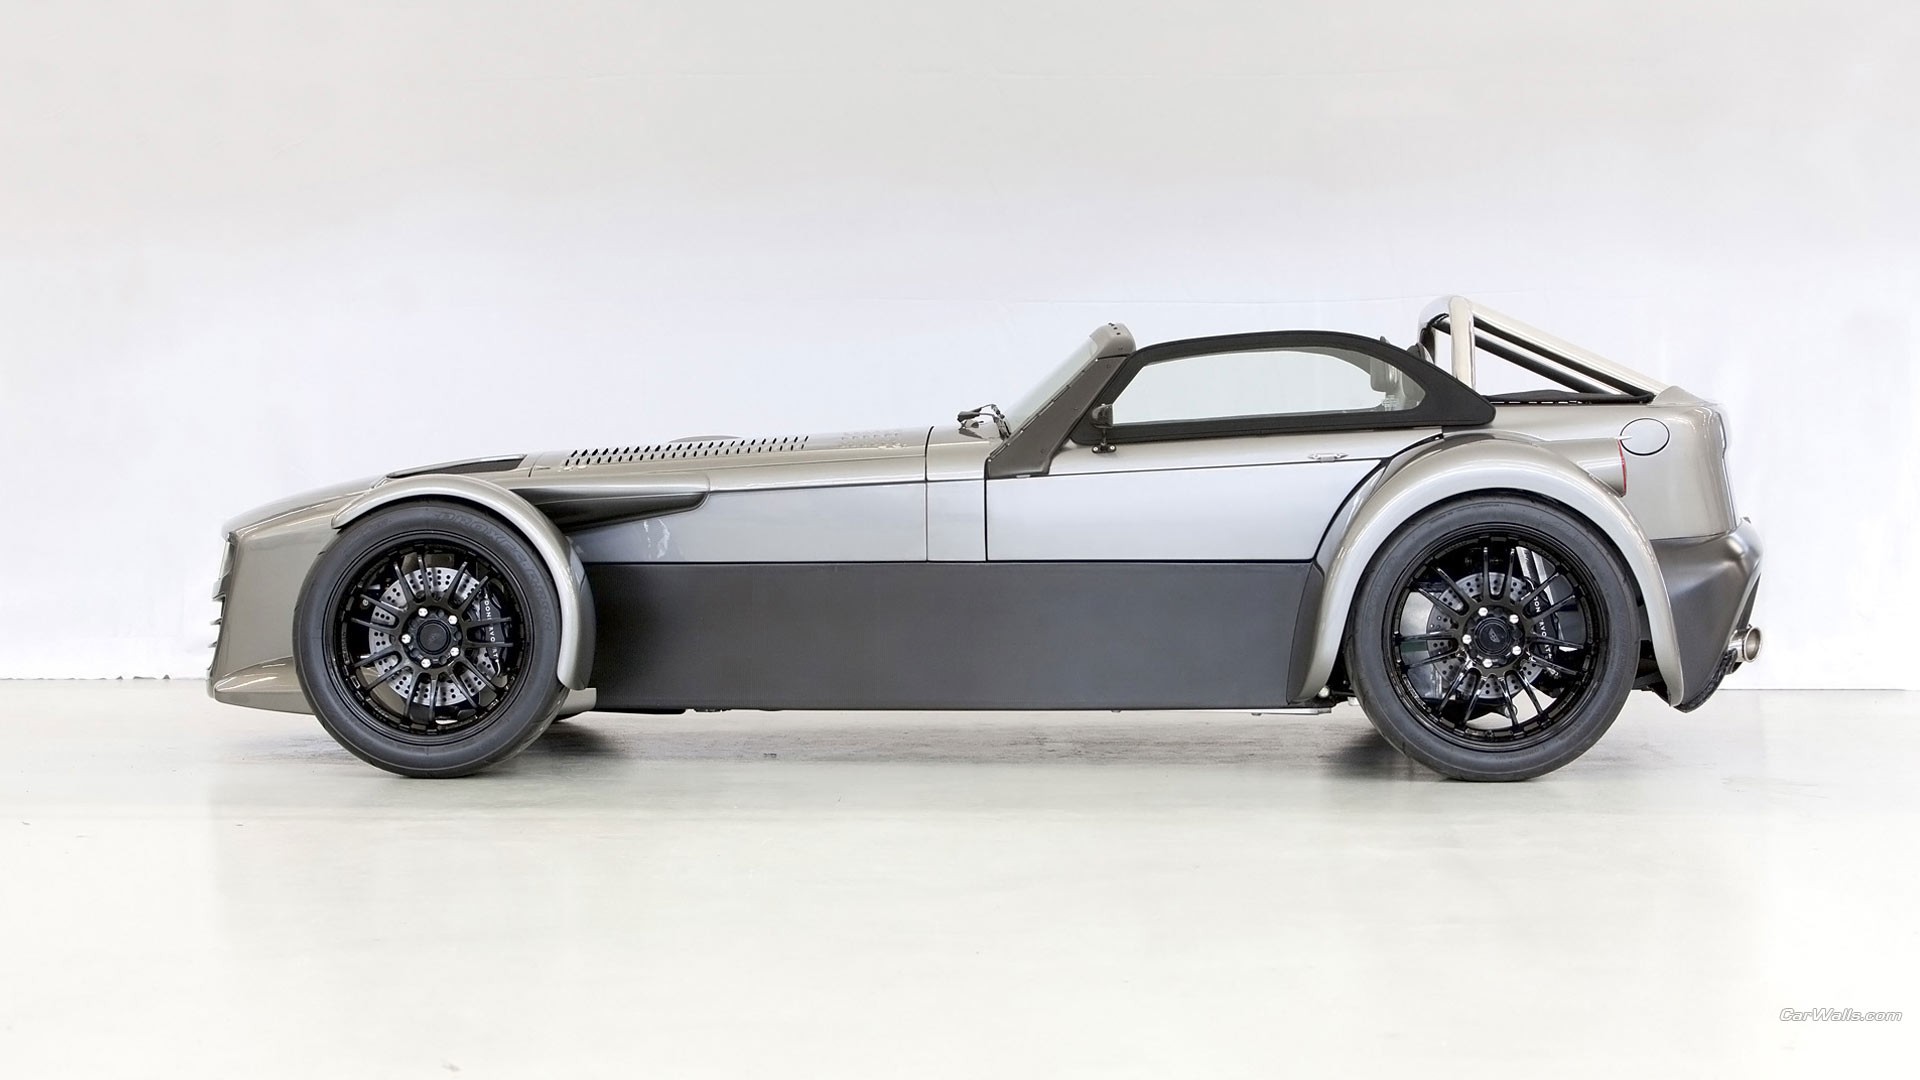 General 1920x1080 Donkervoort D8 GTO car vehicle silver cars Dutch cars sports car